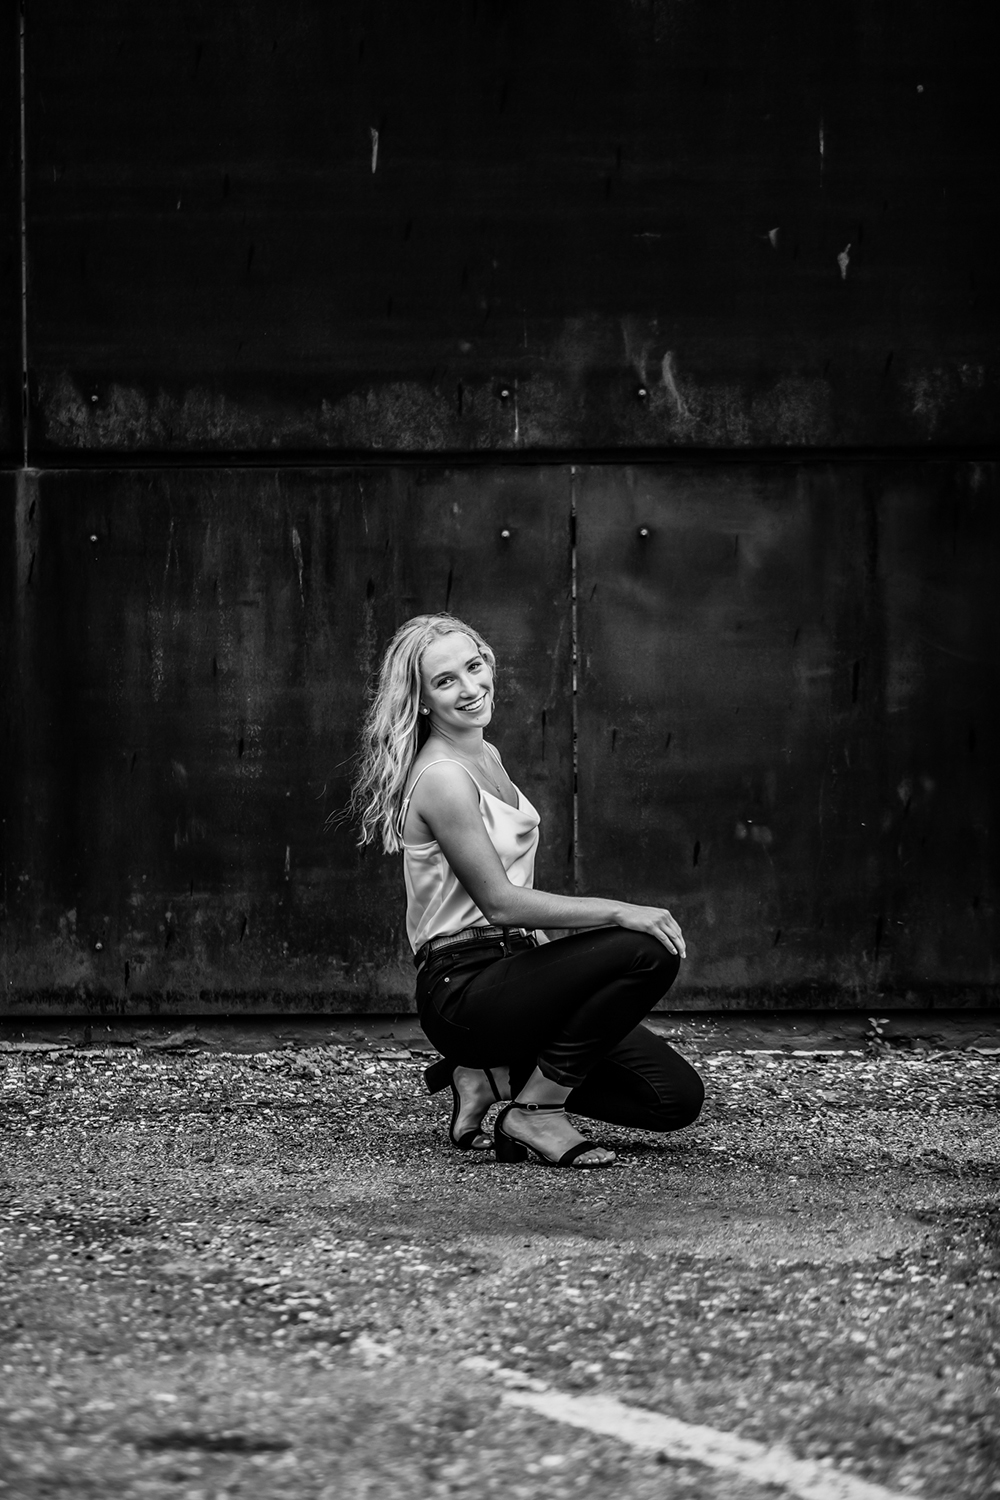 Grads photography image of a teenage girl with long blonde hair kneeling on the ground.